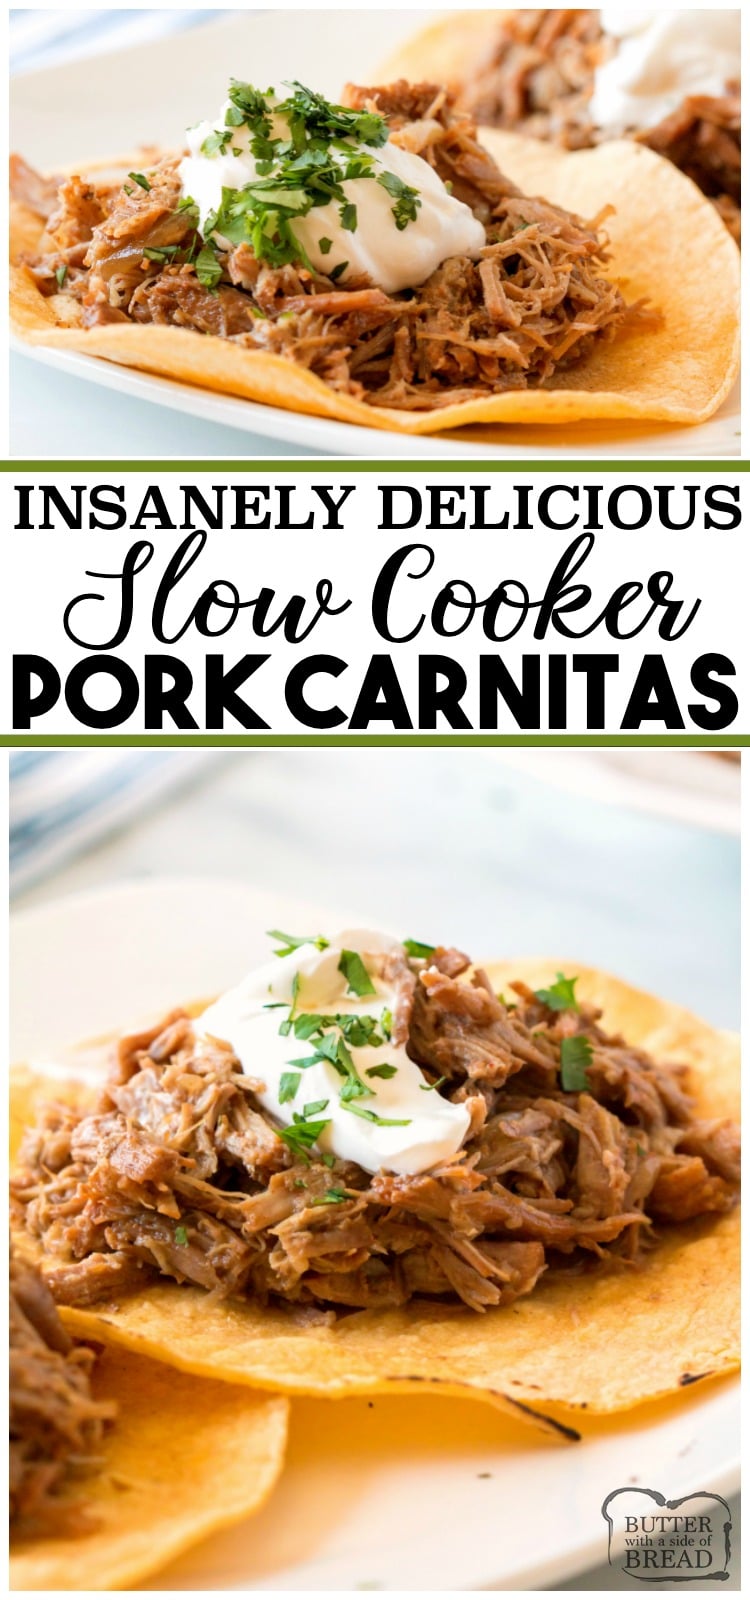 Slow Cooker Pork Carnitas recipe yield a tender, flavorful pork. This carnitas recipe is easy to make in the crock pot and perfect for serving a crowd. Pork Carnitas taste incredible in a warm tortilla topped with avocado, cilantro and a dollop of sour cream.